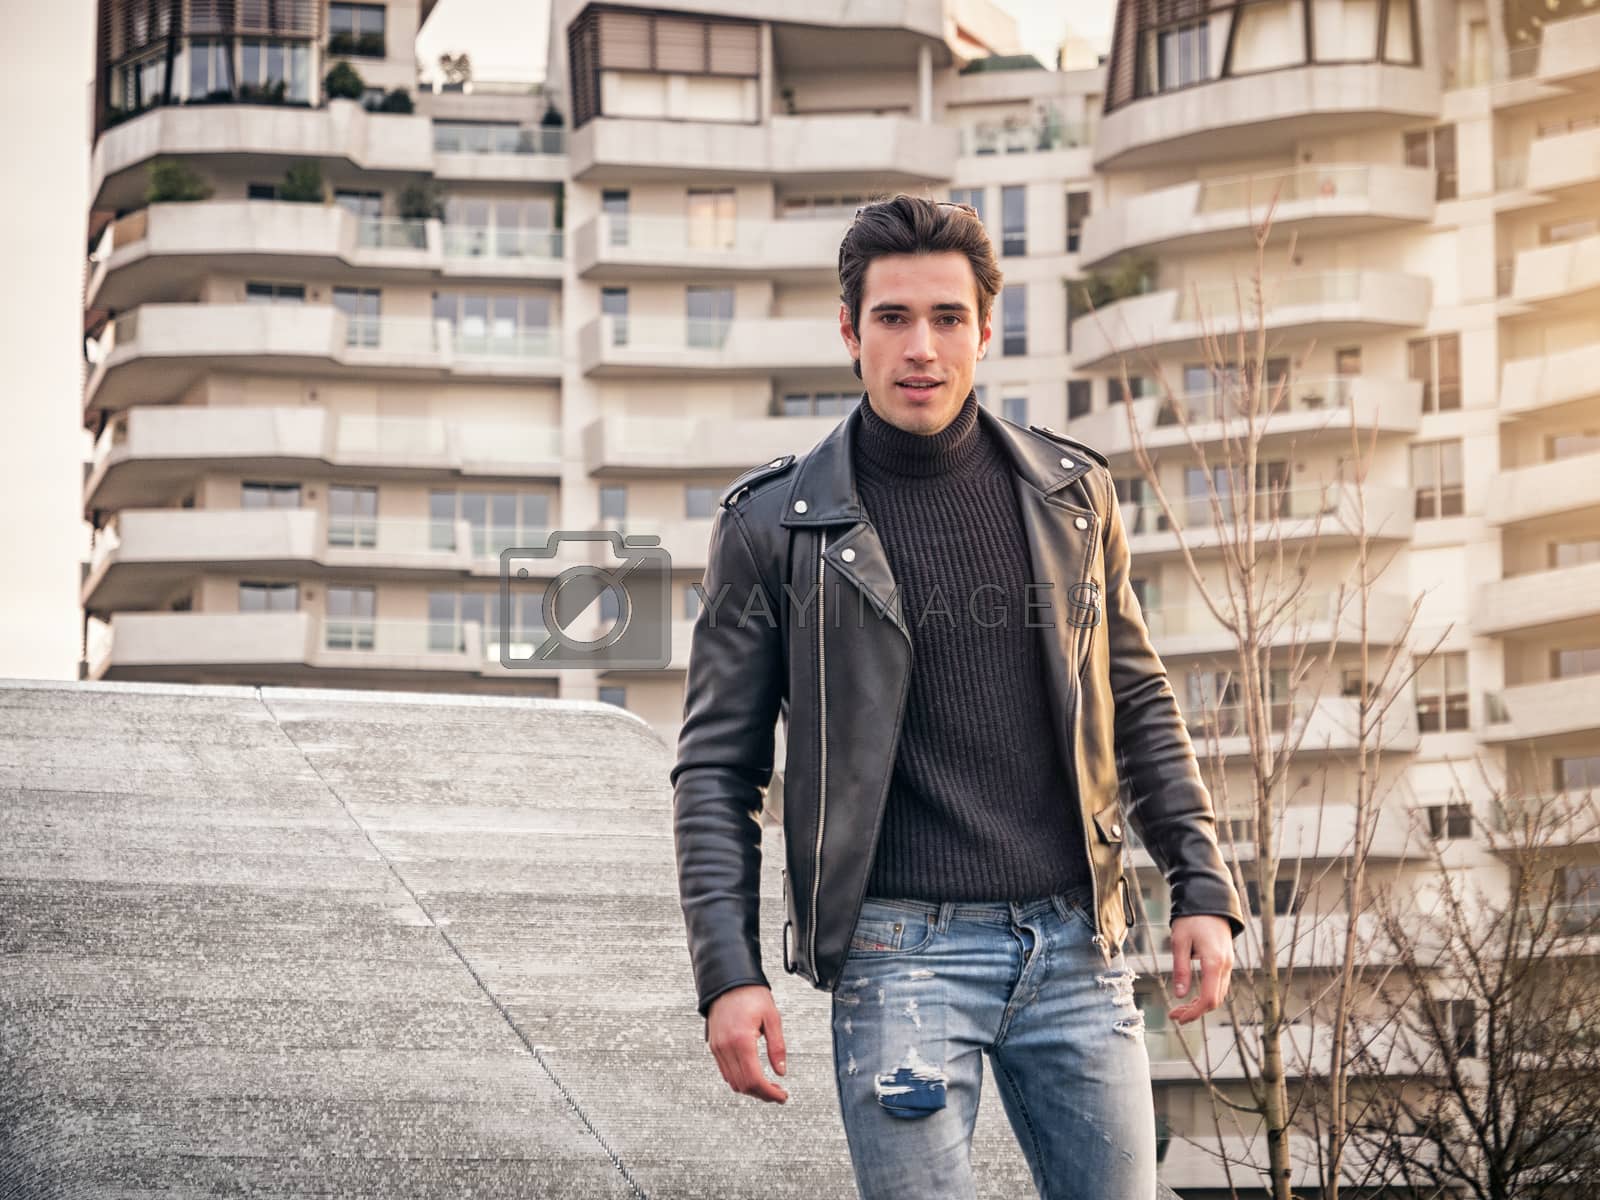 Royalty free image of One handsome young man in modern city setting by artofphoto